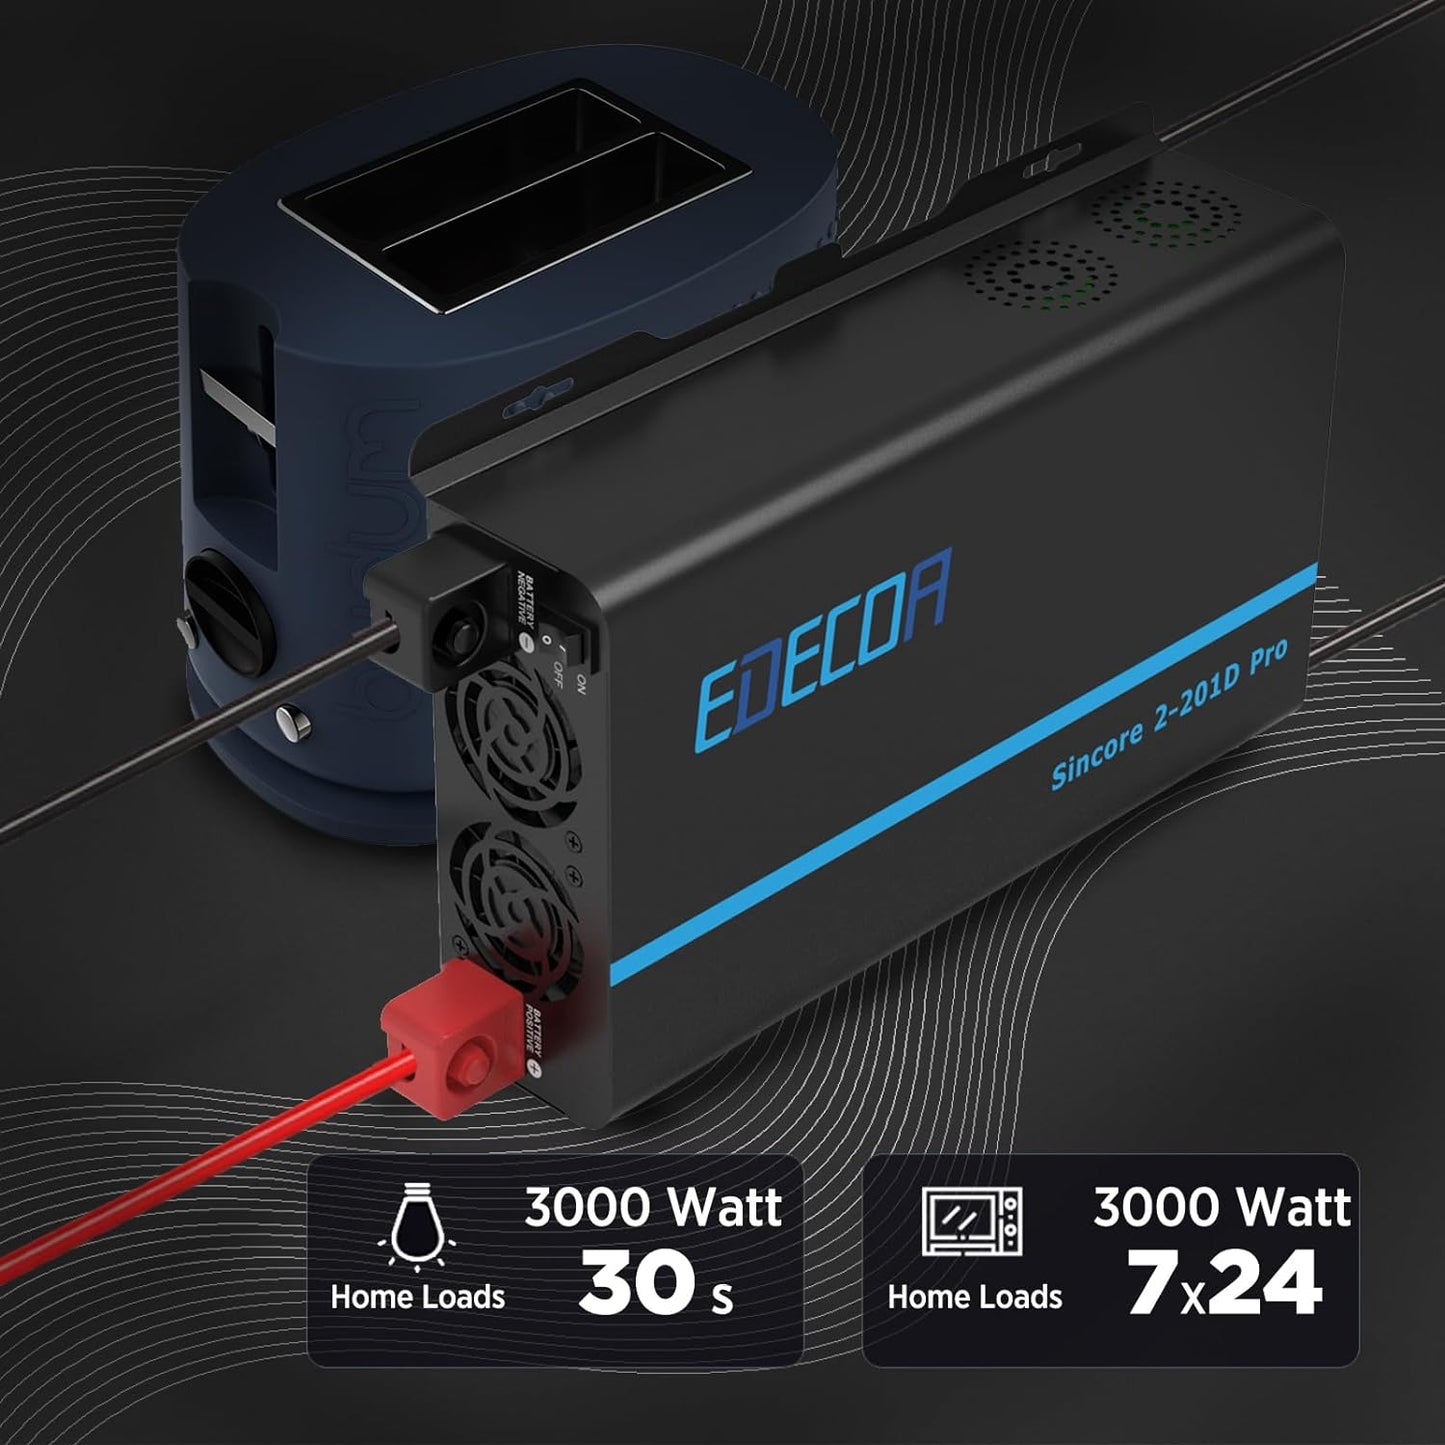 Professional Title: "2000W Pure Sine Wave Power Inverter - DC 12V to AC 110V with USB Port, Type-C Port, 2 AC Outlets, Remote Controller, LED Display - Ideal for RV, Car, Boat, and Household Use"